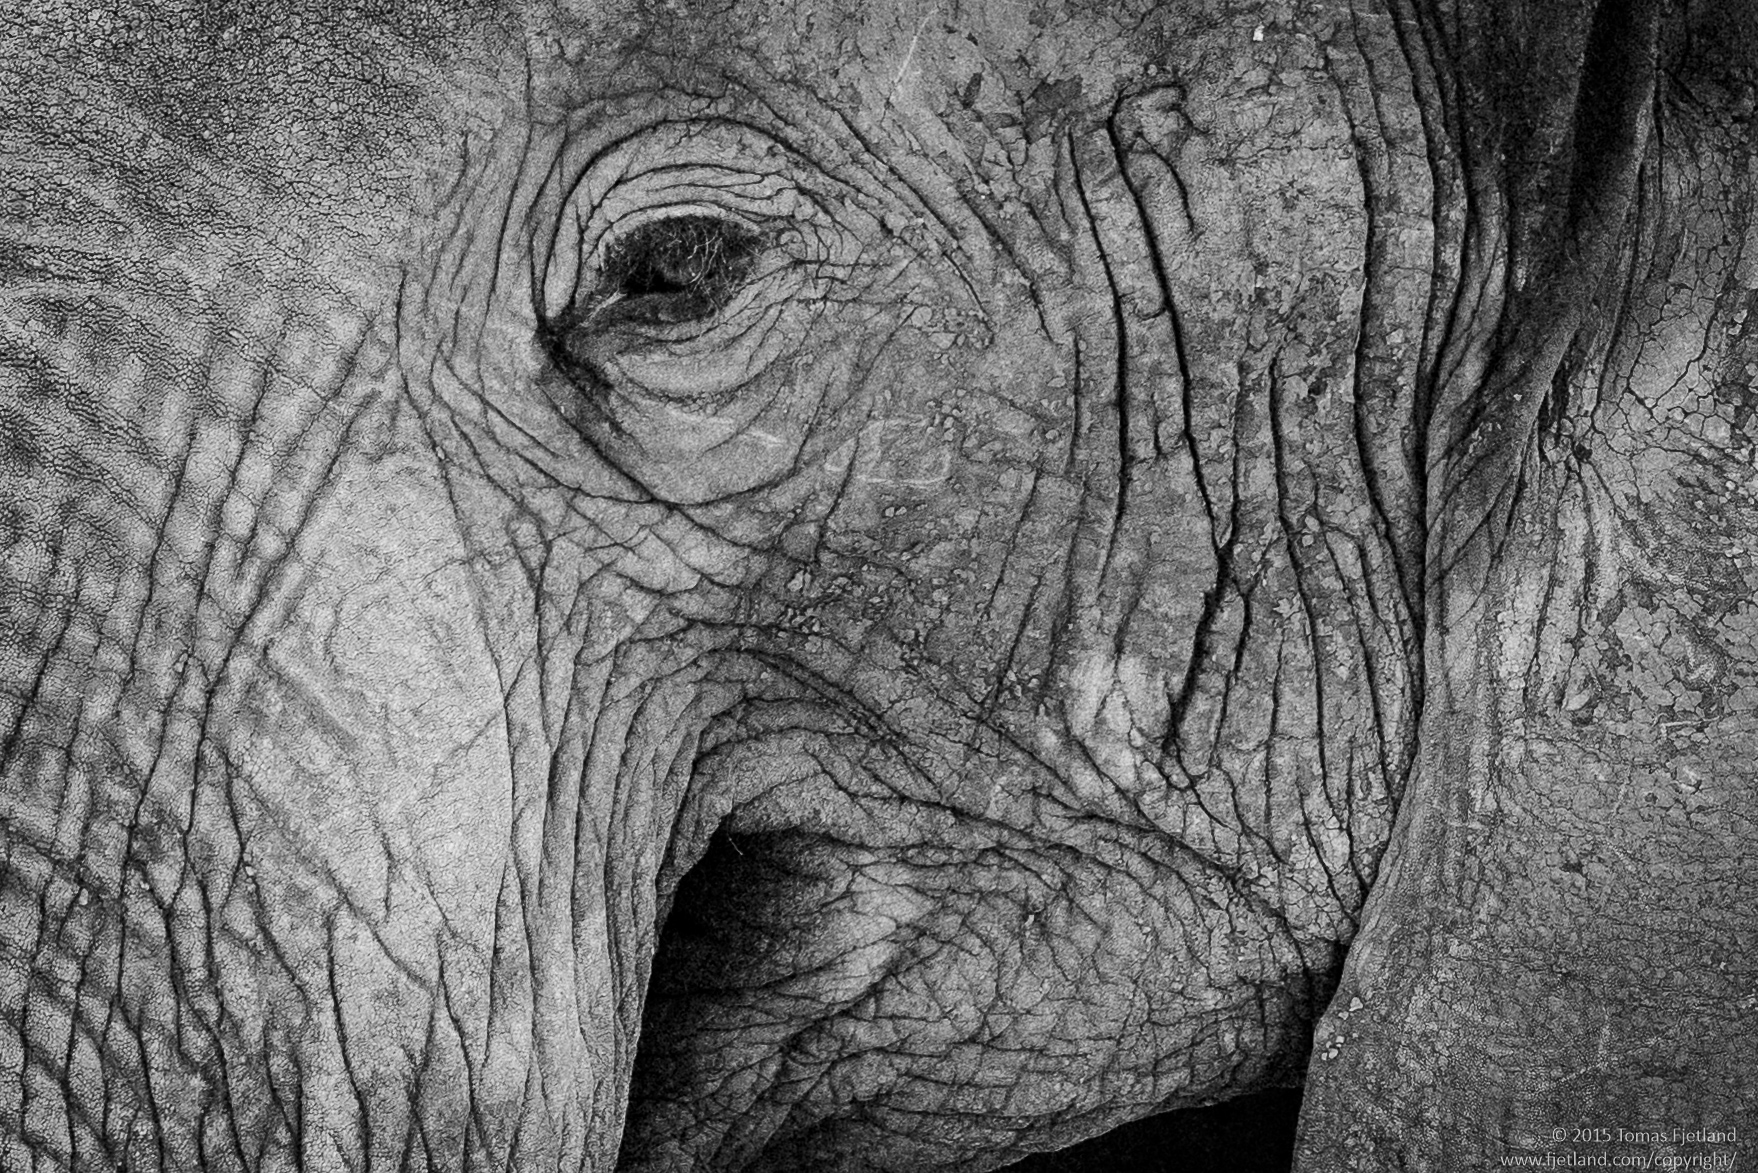 Black and white portrait of a battleworn Elephant male.